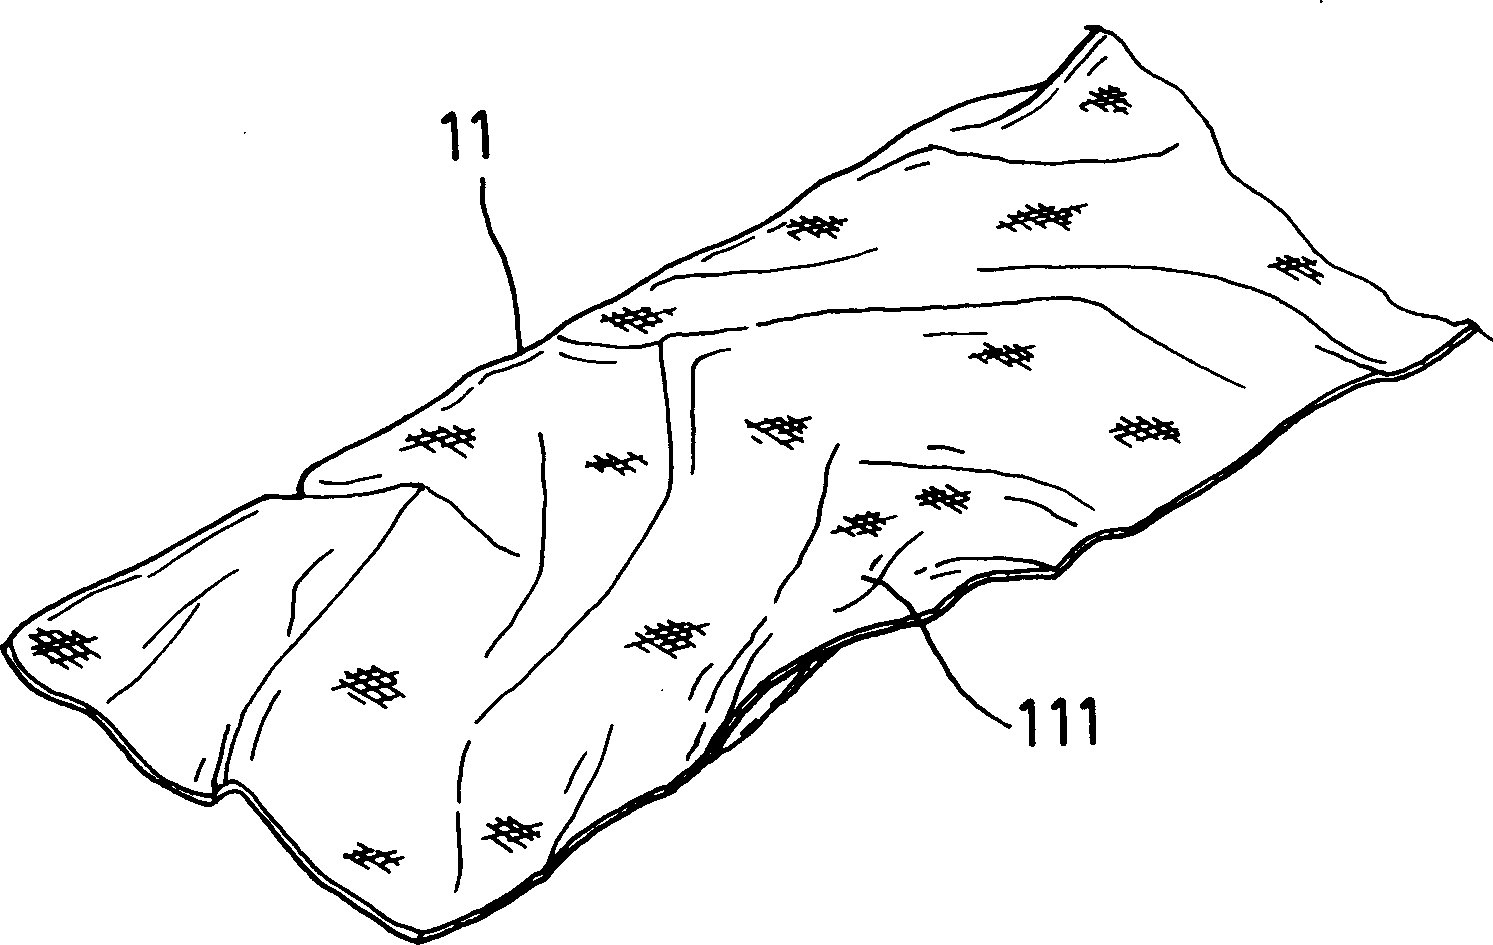 Method and apparatus for dyeing and sampling soft bag